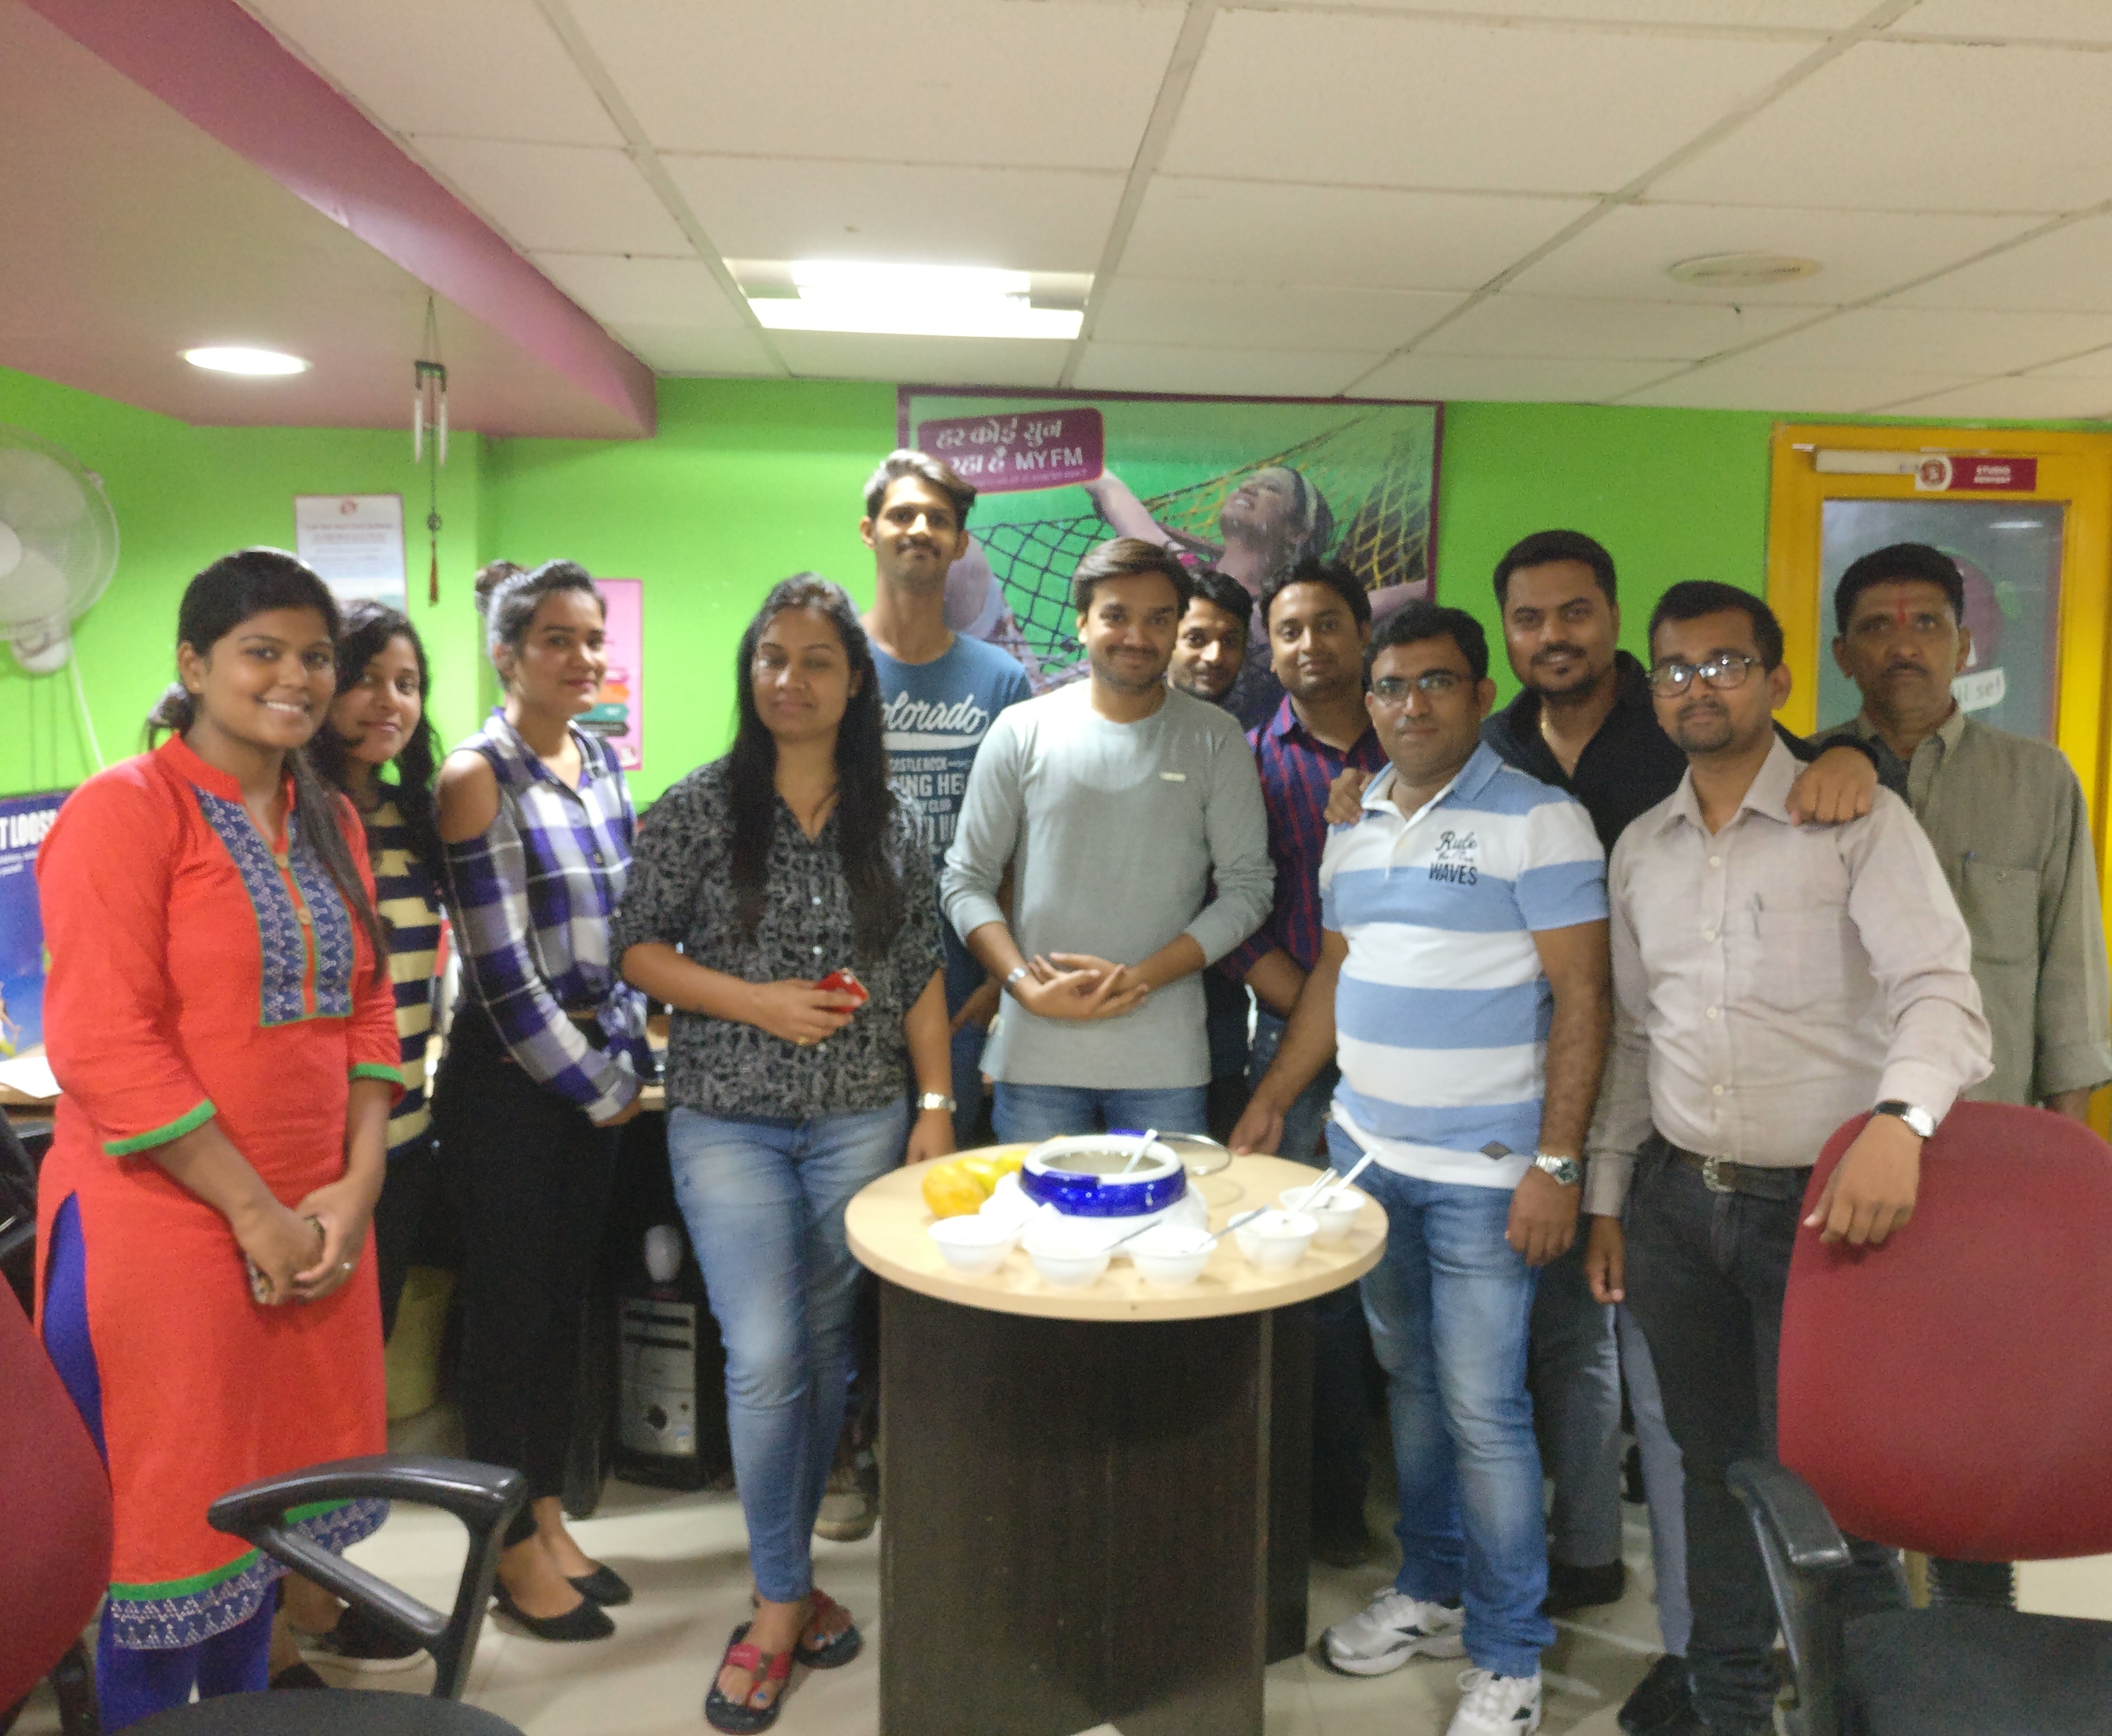 94.3 MY FM Udaipur Connected With Hearts Celebrating 10 Years Of Success